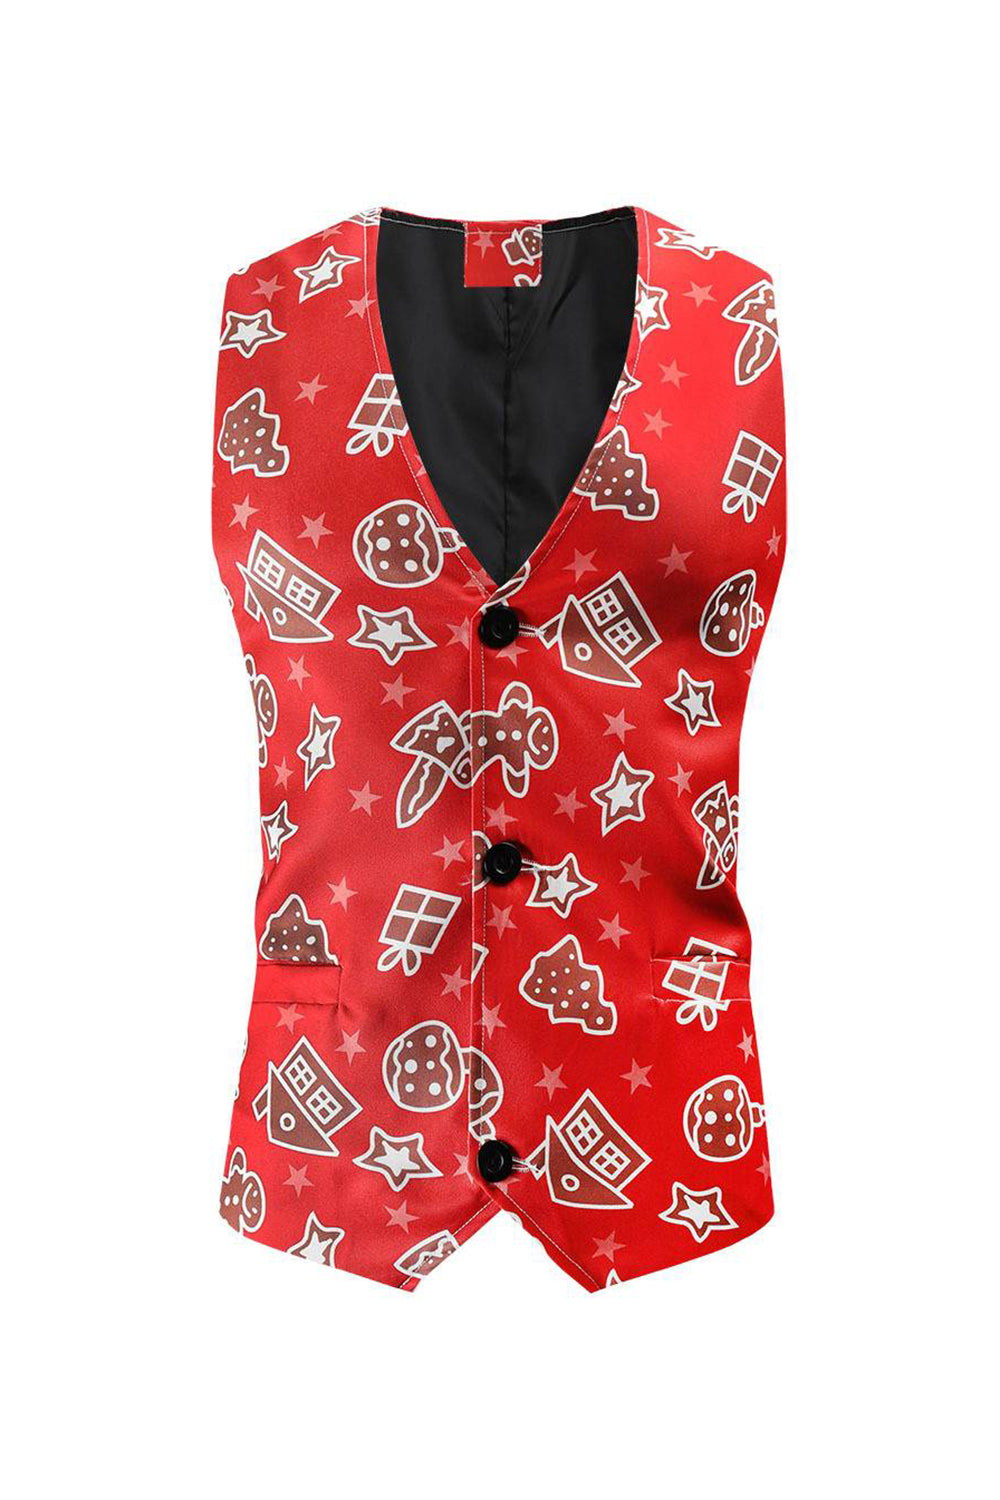 Red Sleeveless Single Breasted Men's Christmas Suit Vest